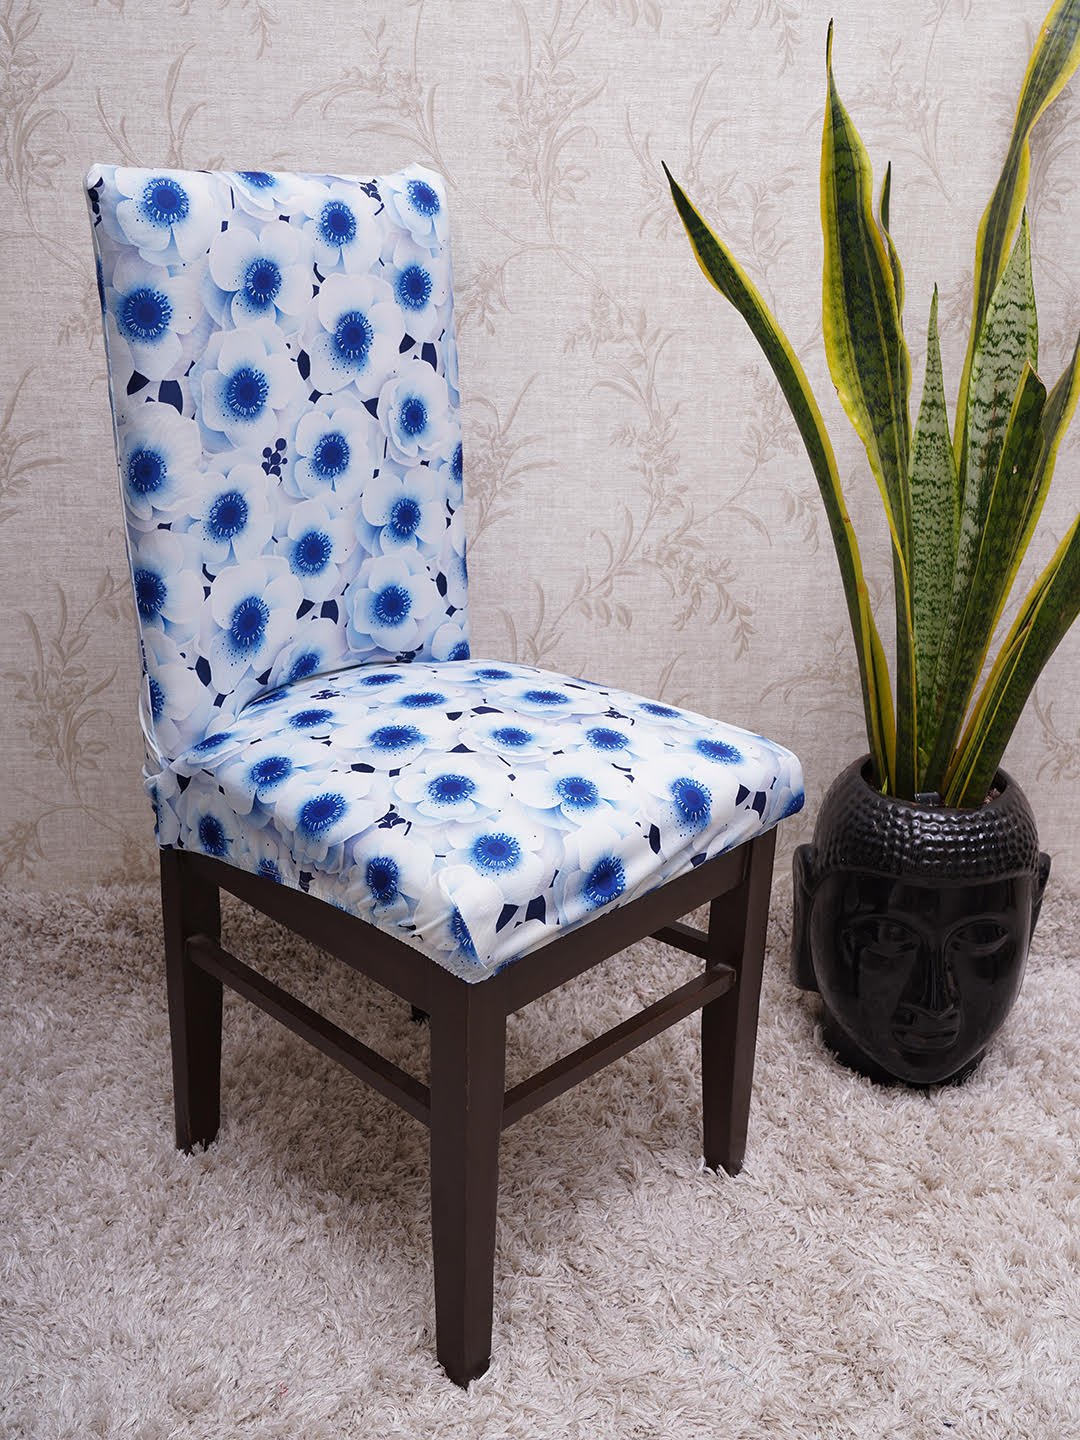 Magic Universal Chair Cover - Red Geometric Printed - DivineTrendz, Small bedroom chair covers, bedroom chair slip covers, chairs covers near me, chairs covers set of 6, chair slipcovers for dining table, chair covers set of 6 in india,chair covers online, magic universal chair cover -3D blue flower.